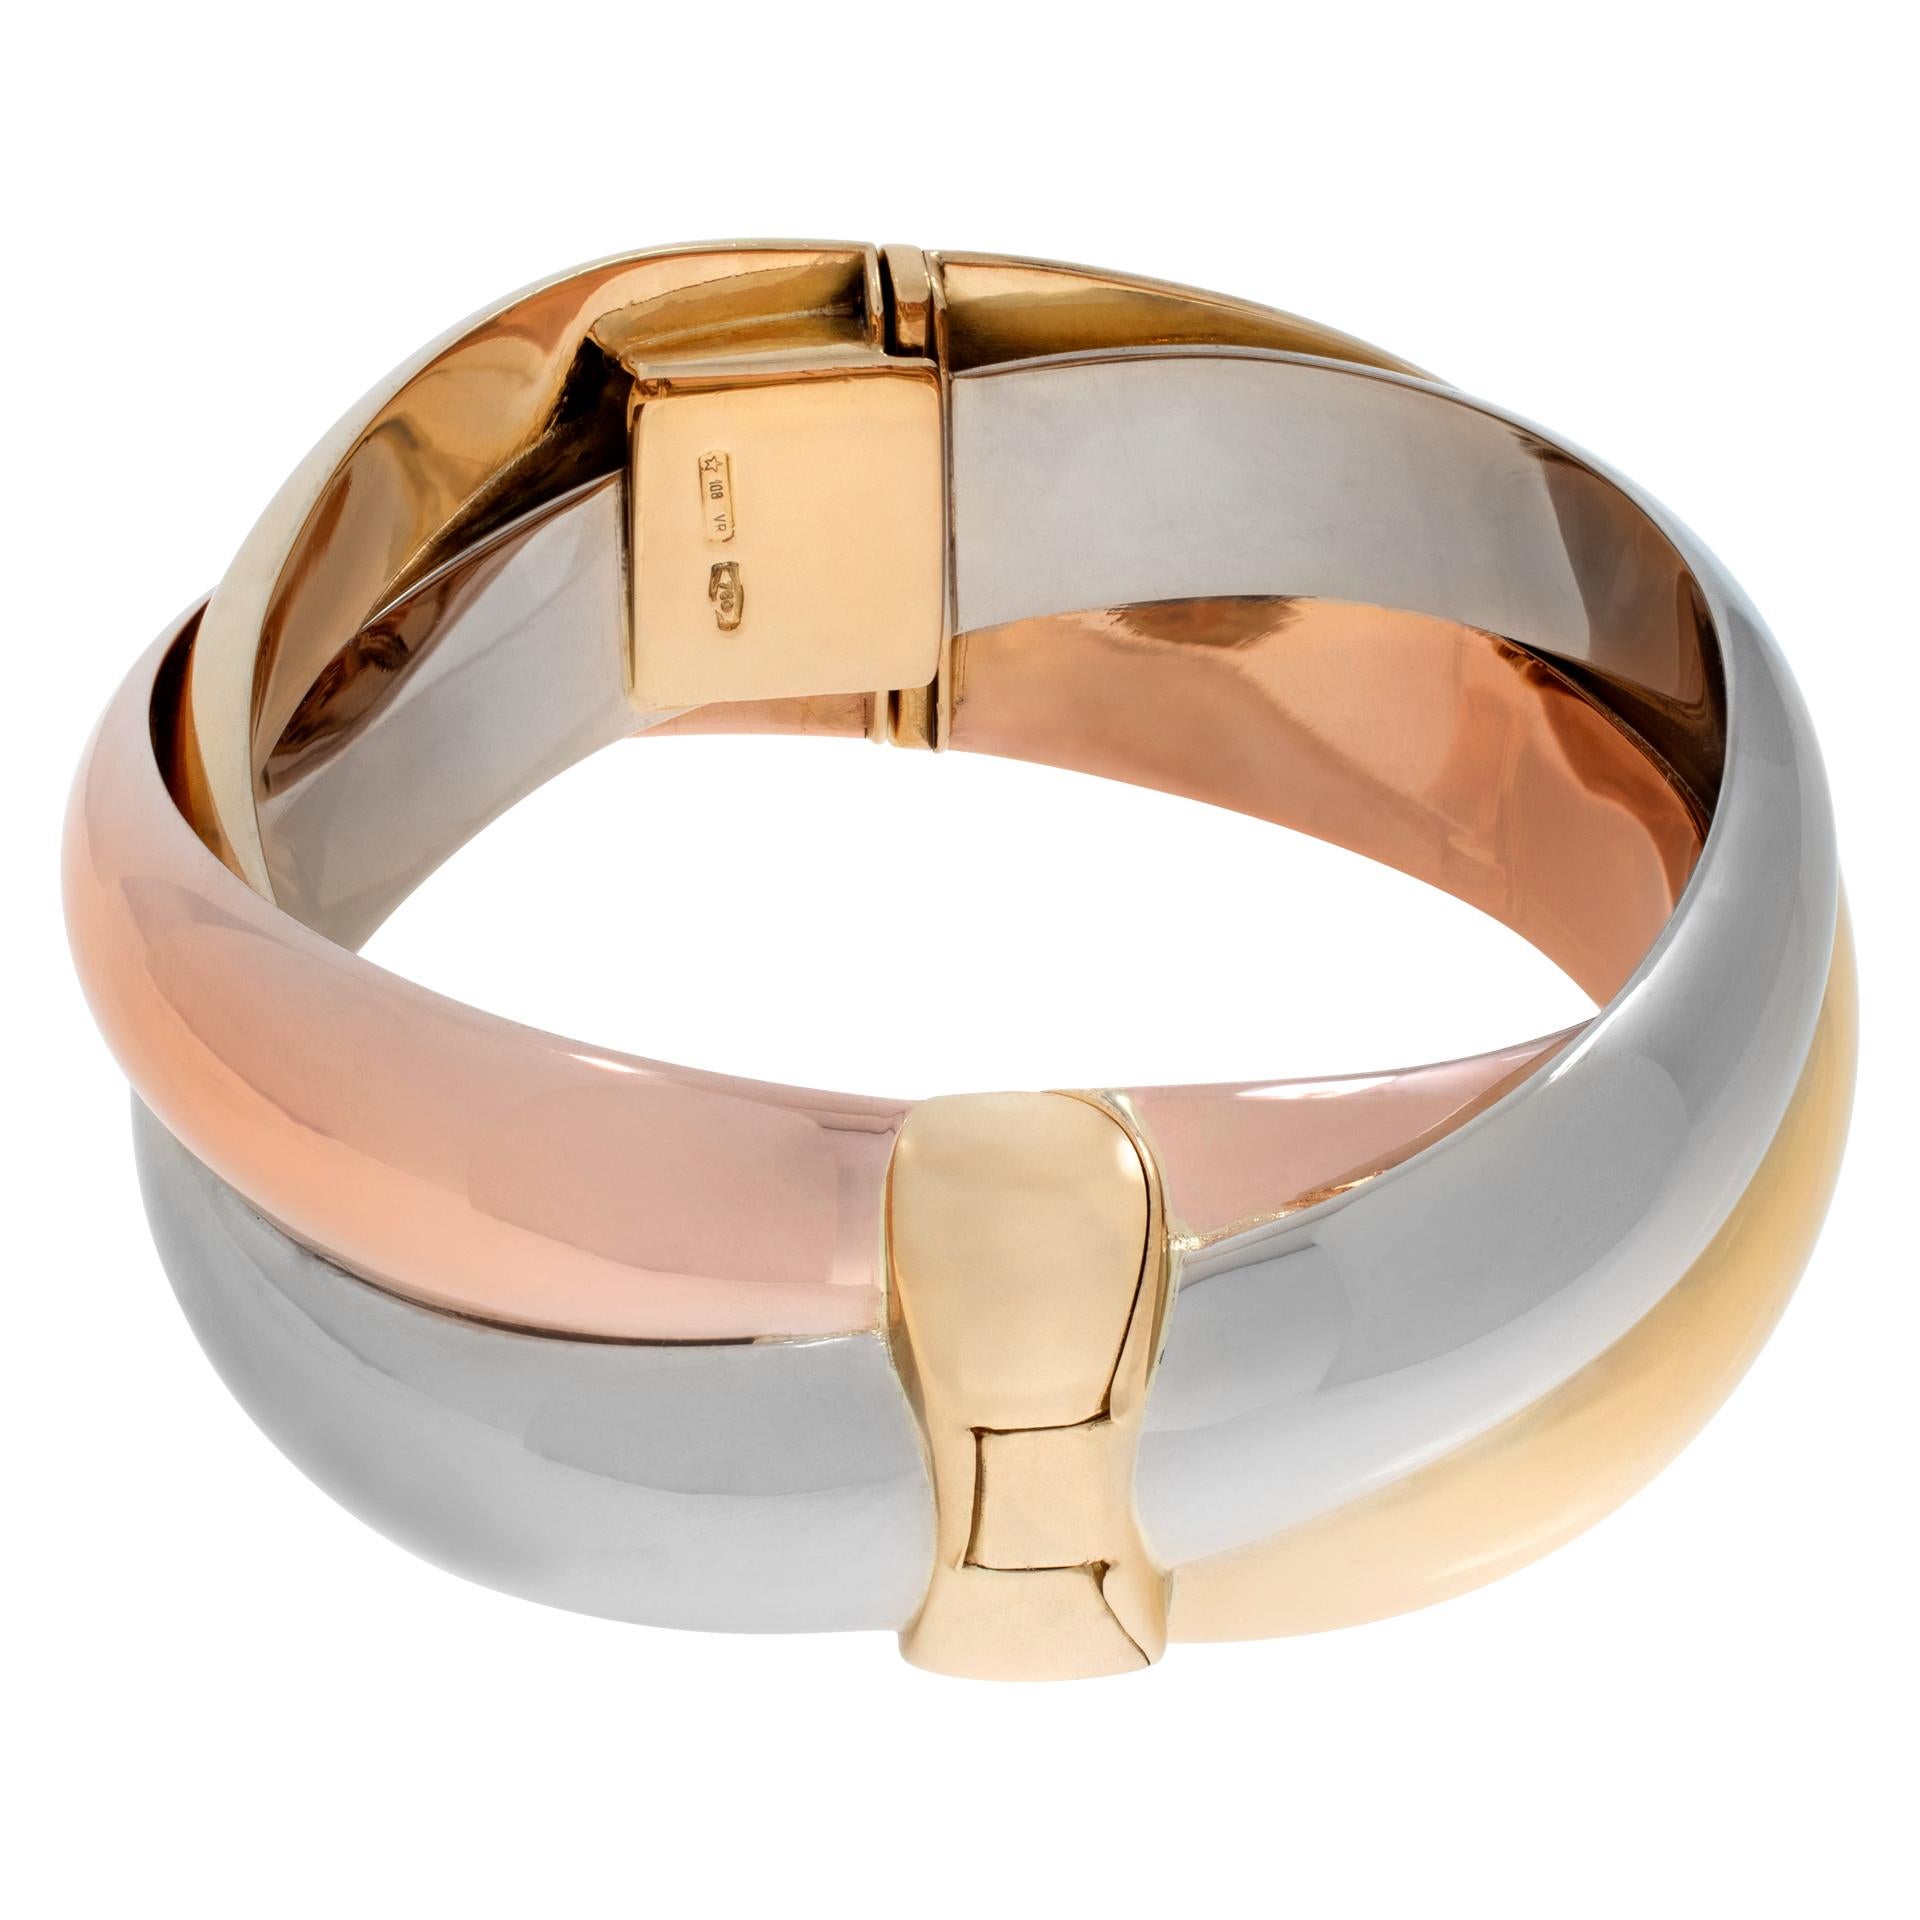 Wide tri-color bangle bracelet in 18k white, yellow and rose gold intertwined together. 0.75 inch width.
